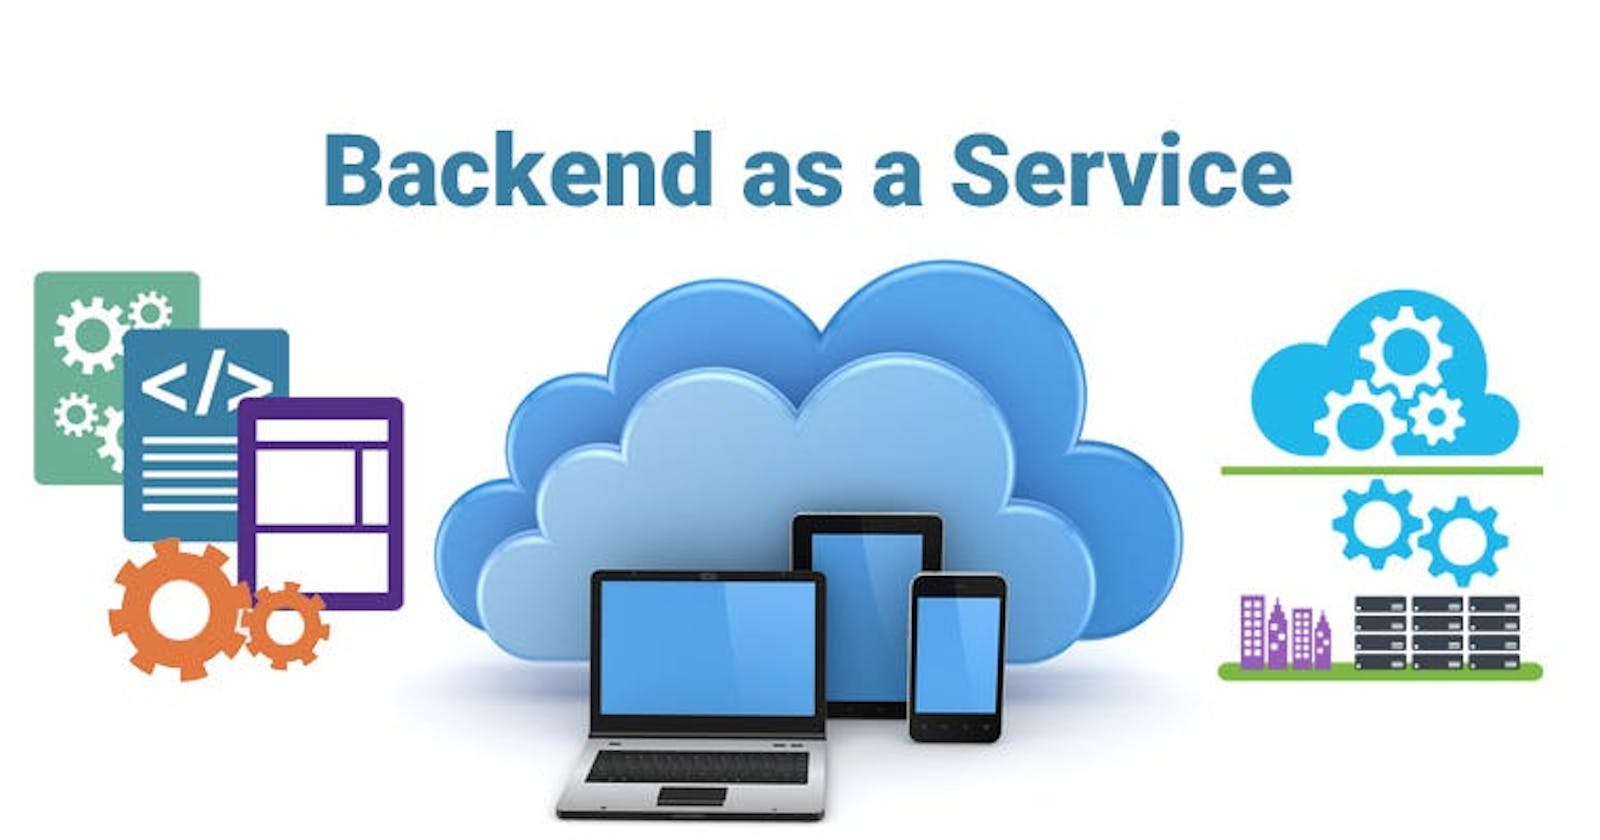 Backend-As-A-Service Market Key Players, SWOT Analysis, Key Indicators and Forecast to 2033